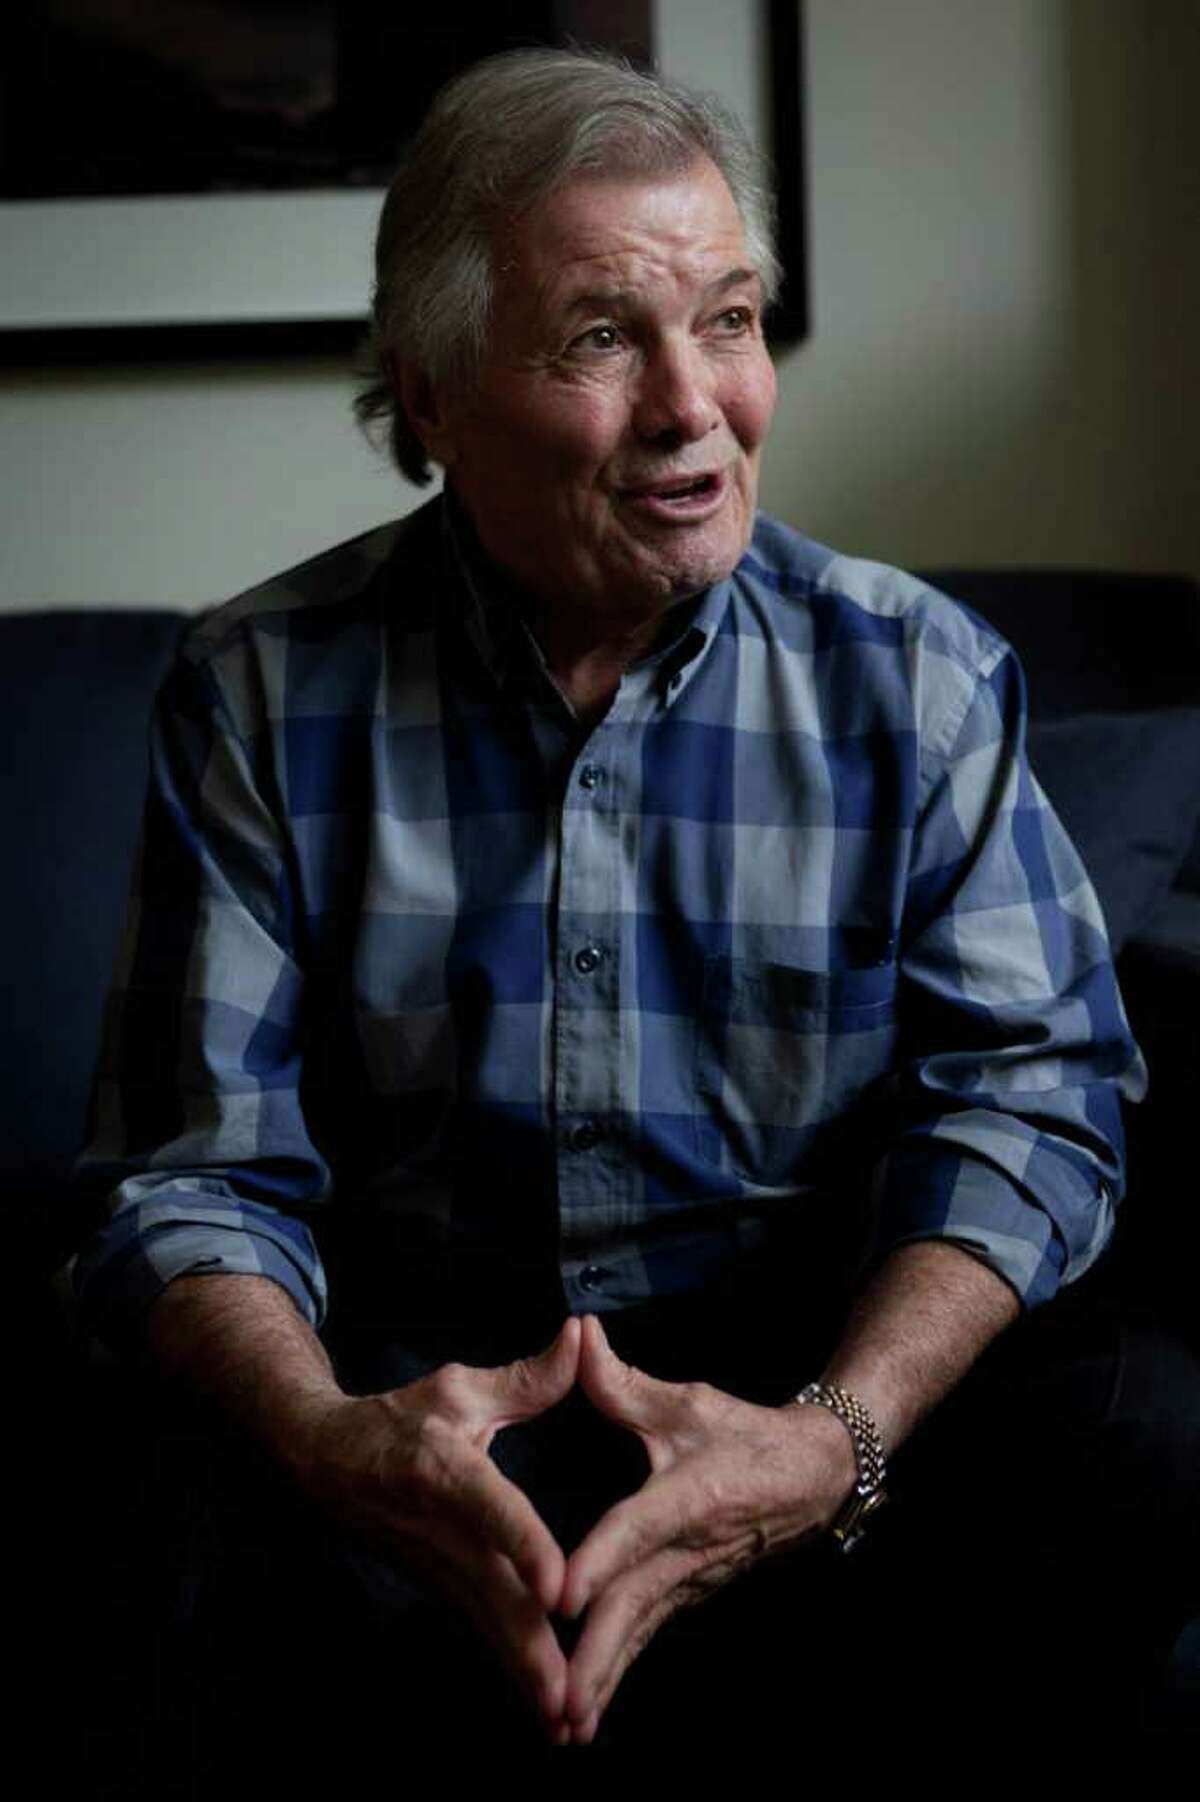 Celebrity chef Jacques Pepin will appear at the Greenwich 2011 Food + Wine Festival this weekend at Roger Sherman Baldwin Park. (AP Photo/John Minchillo)